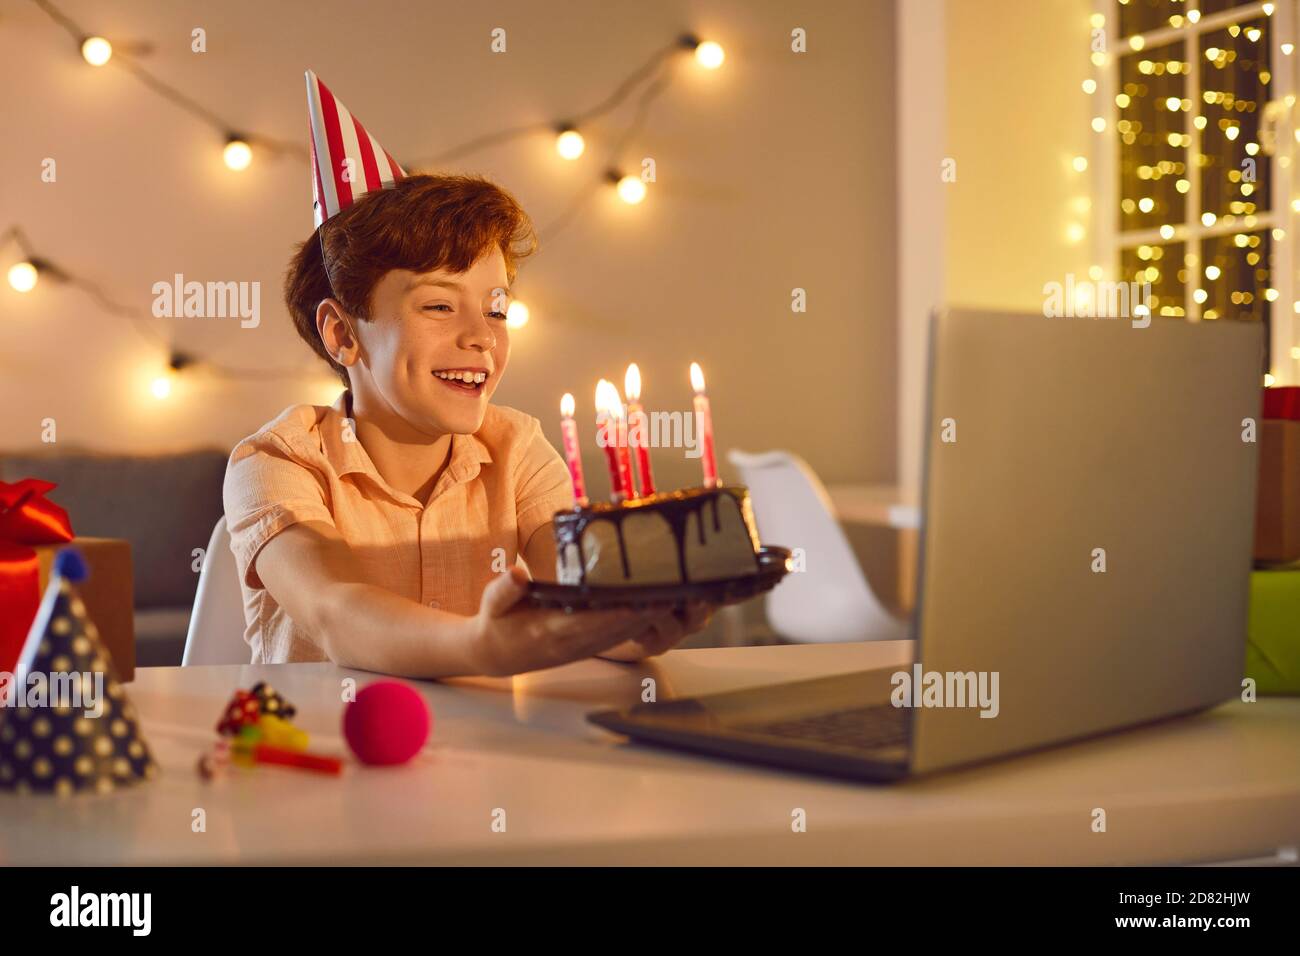 Happy boy sitting at laptop computer and having online birthday party with friends or relatives Stock Photo